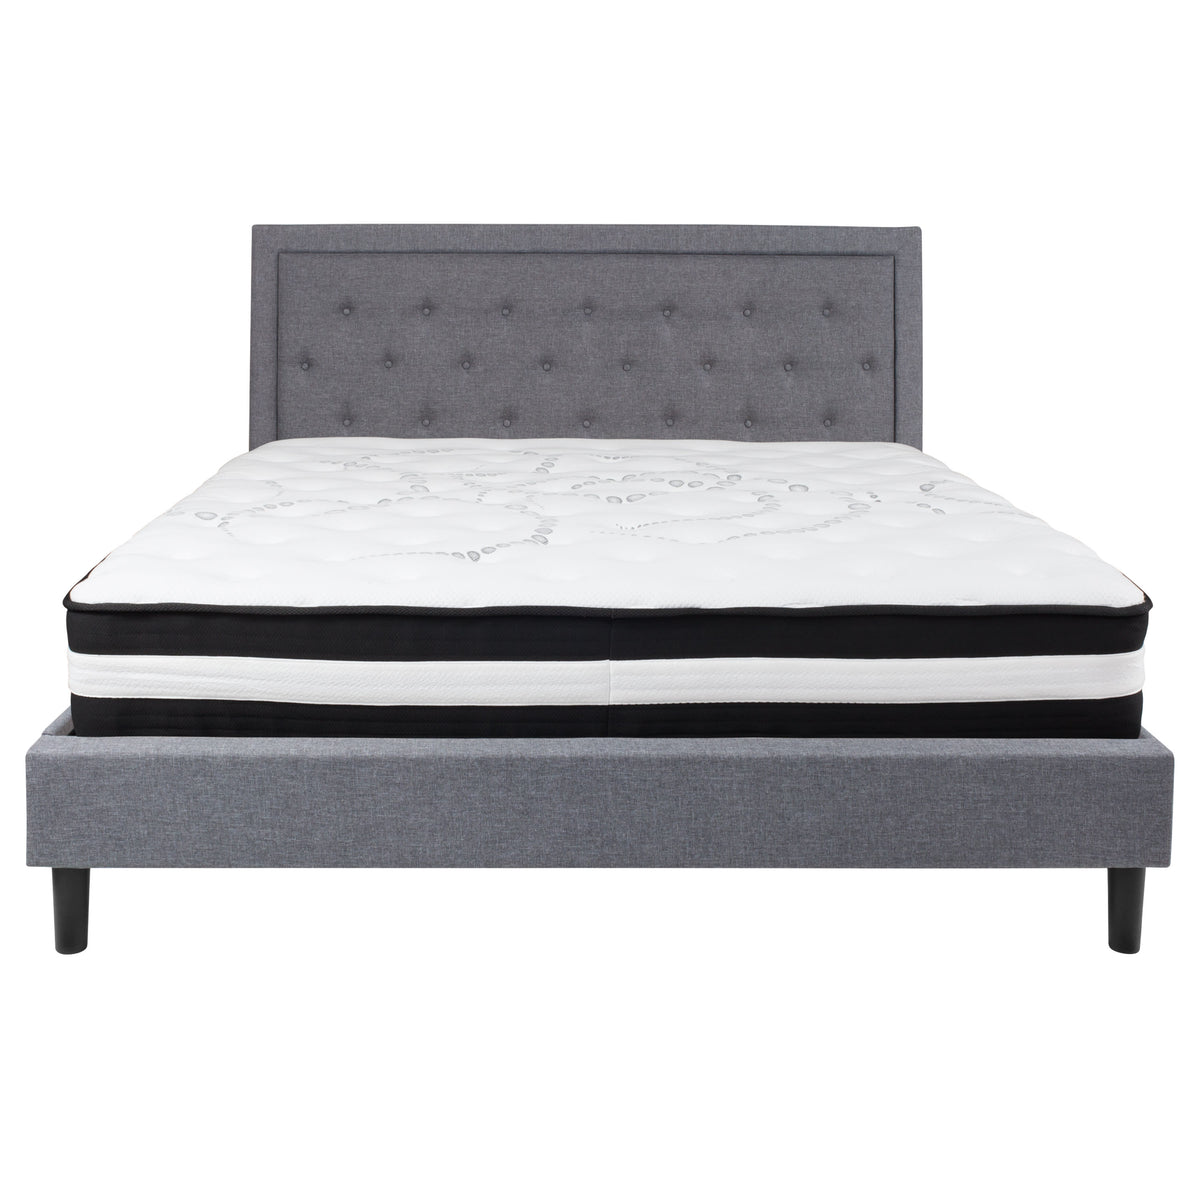 Light Gray,King |#| King Size Panel Tufted Lt Gray Fabric Platform Bed with Pocket Spring Mattress